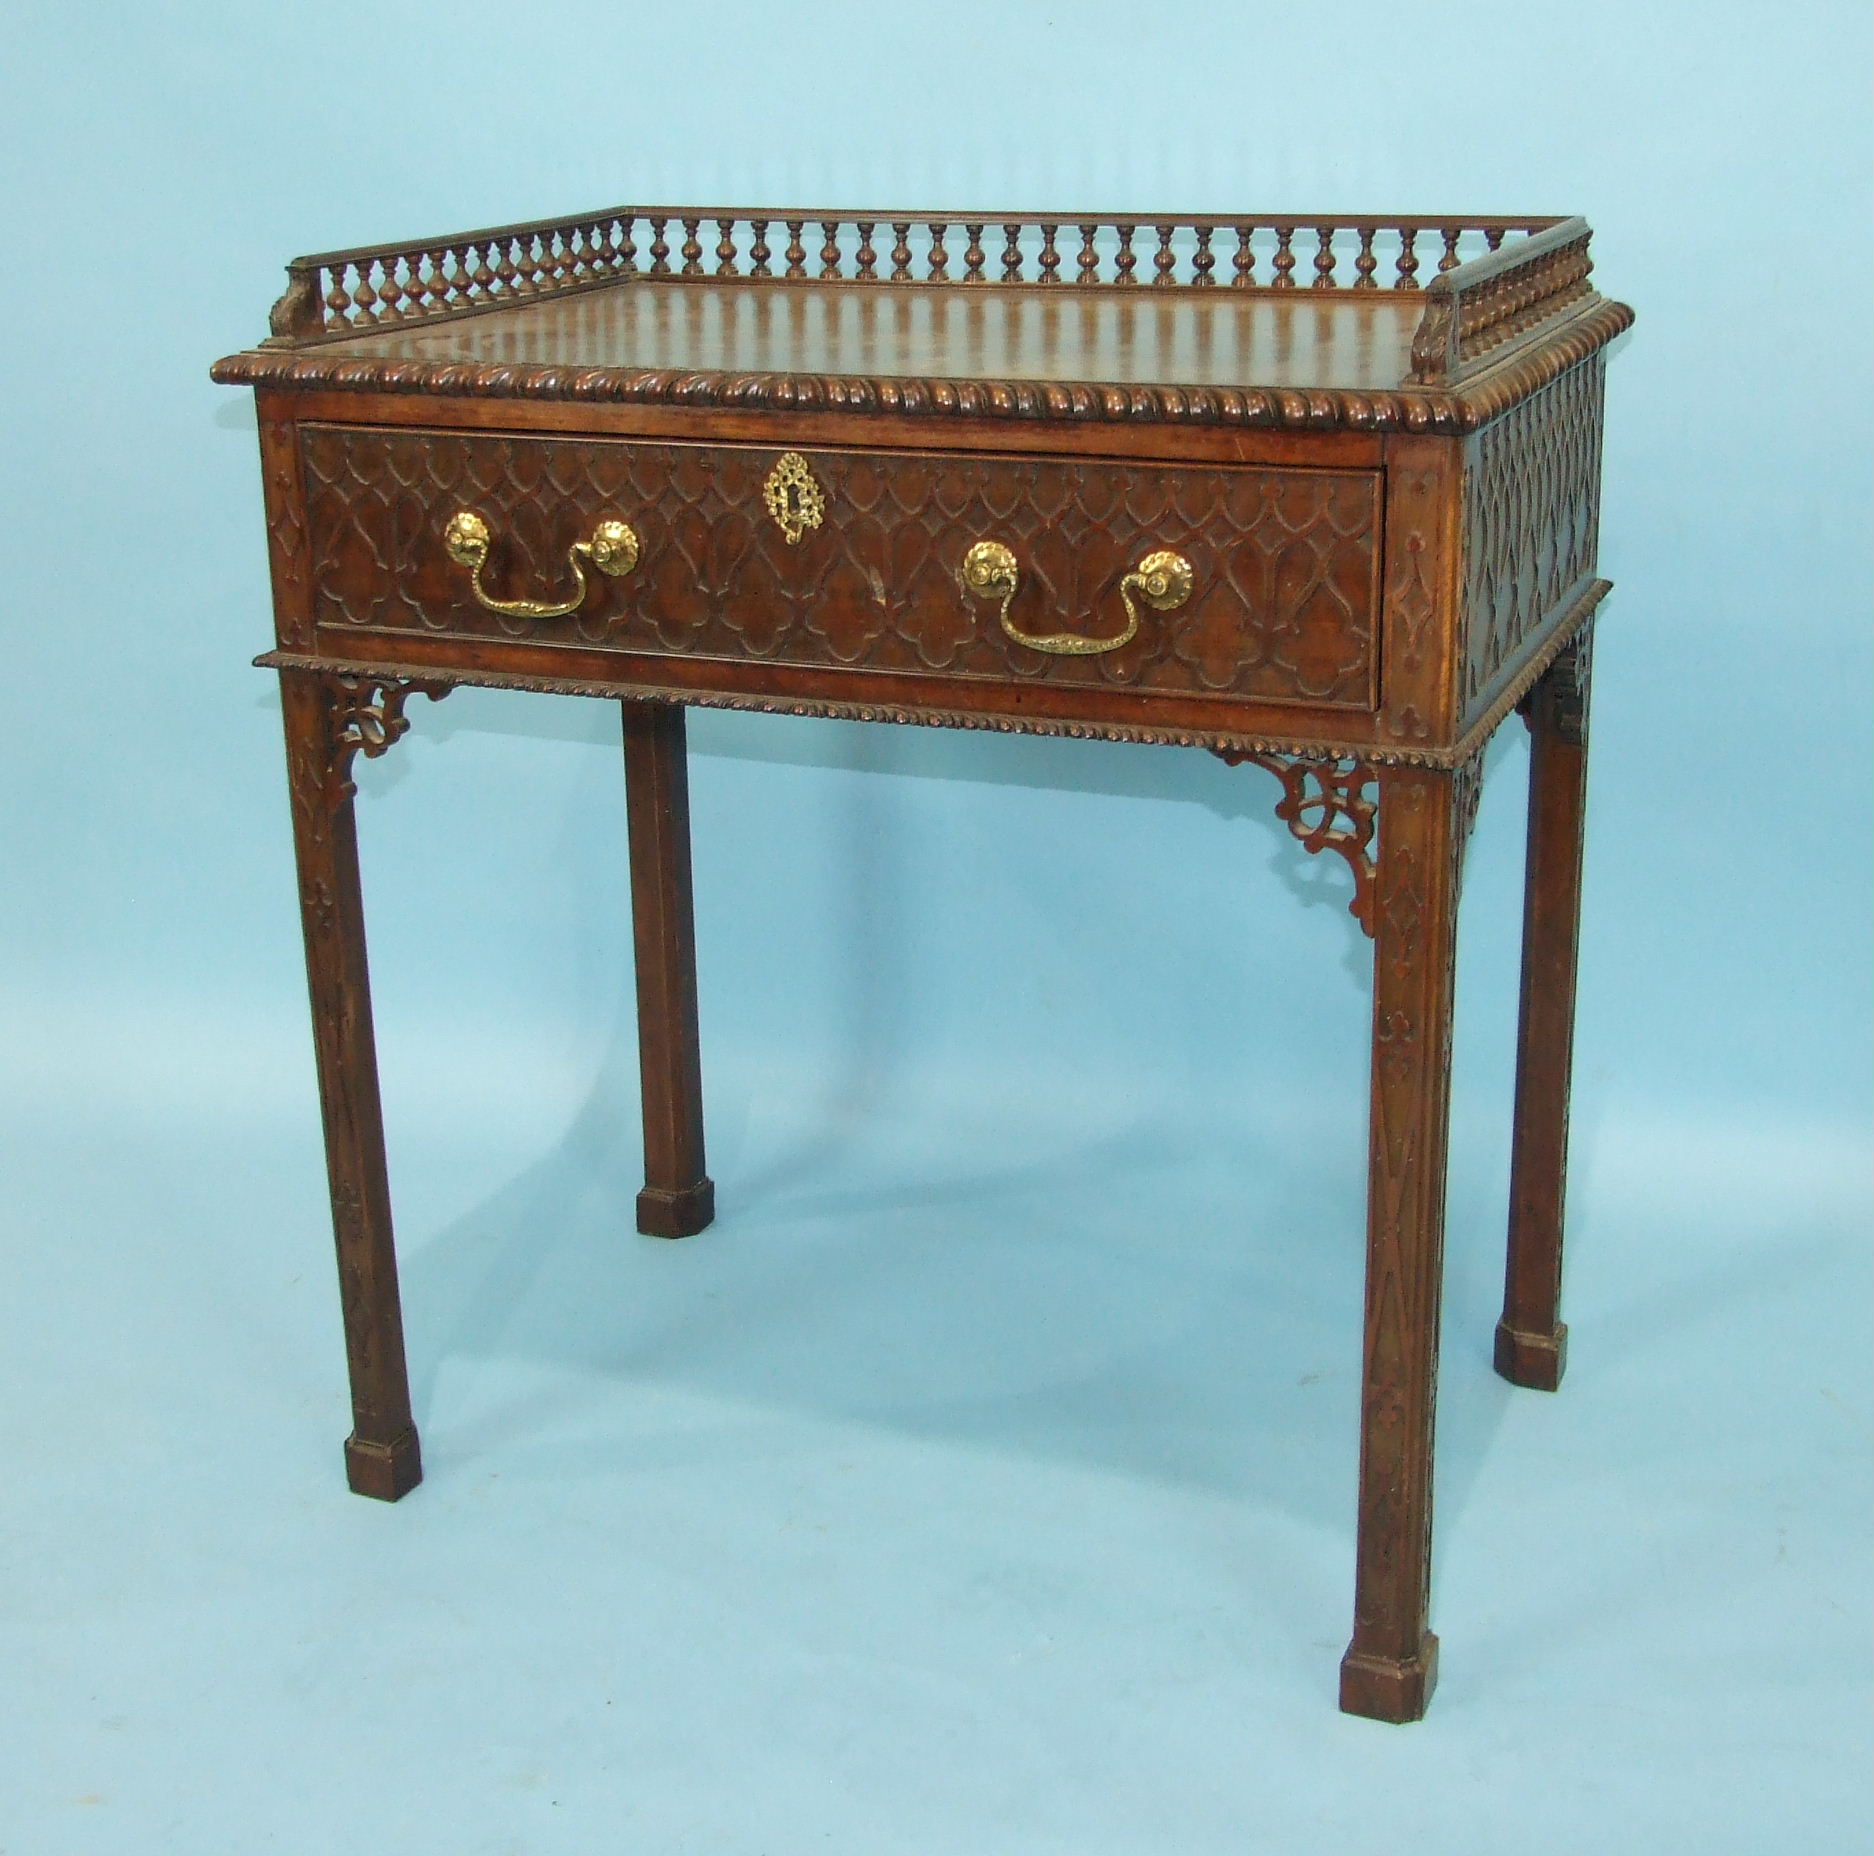 A good quality mahogany side table in the Chippendale taste, the rectangular galleried top above a - Image 2 of 4